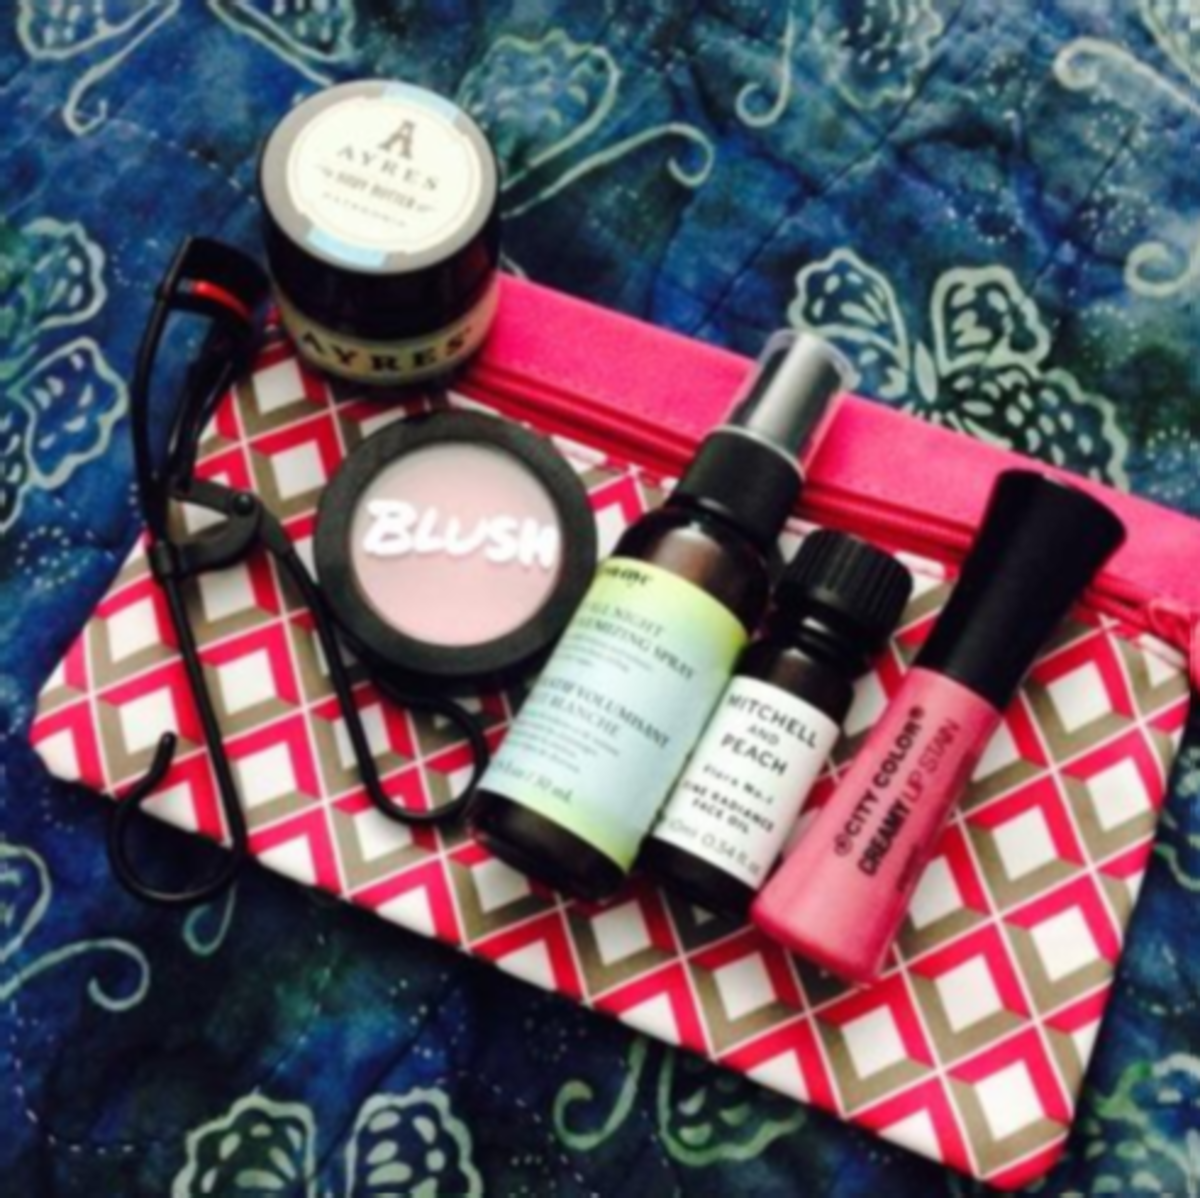 You get five sample-sized items in a Ipsy glam bag.